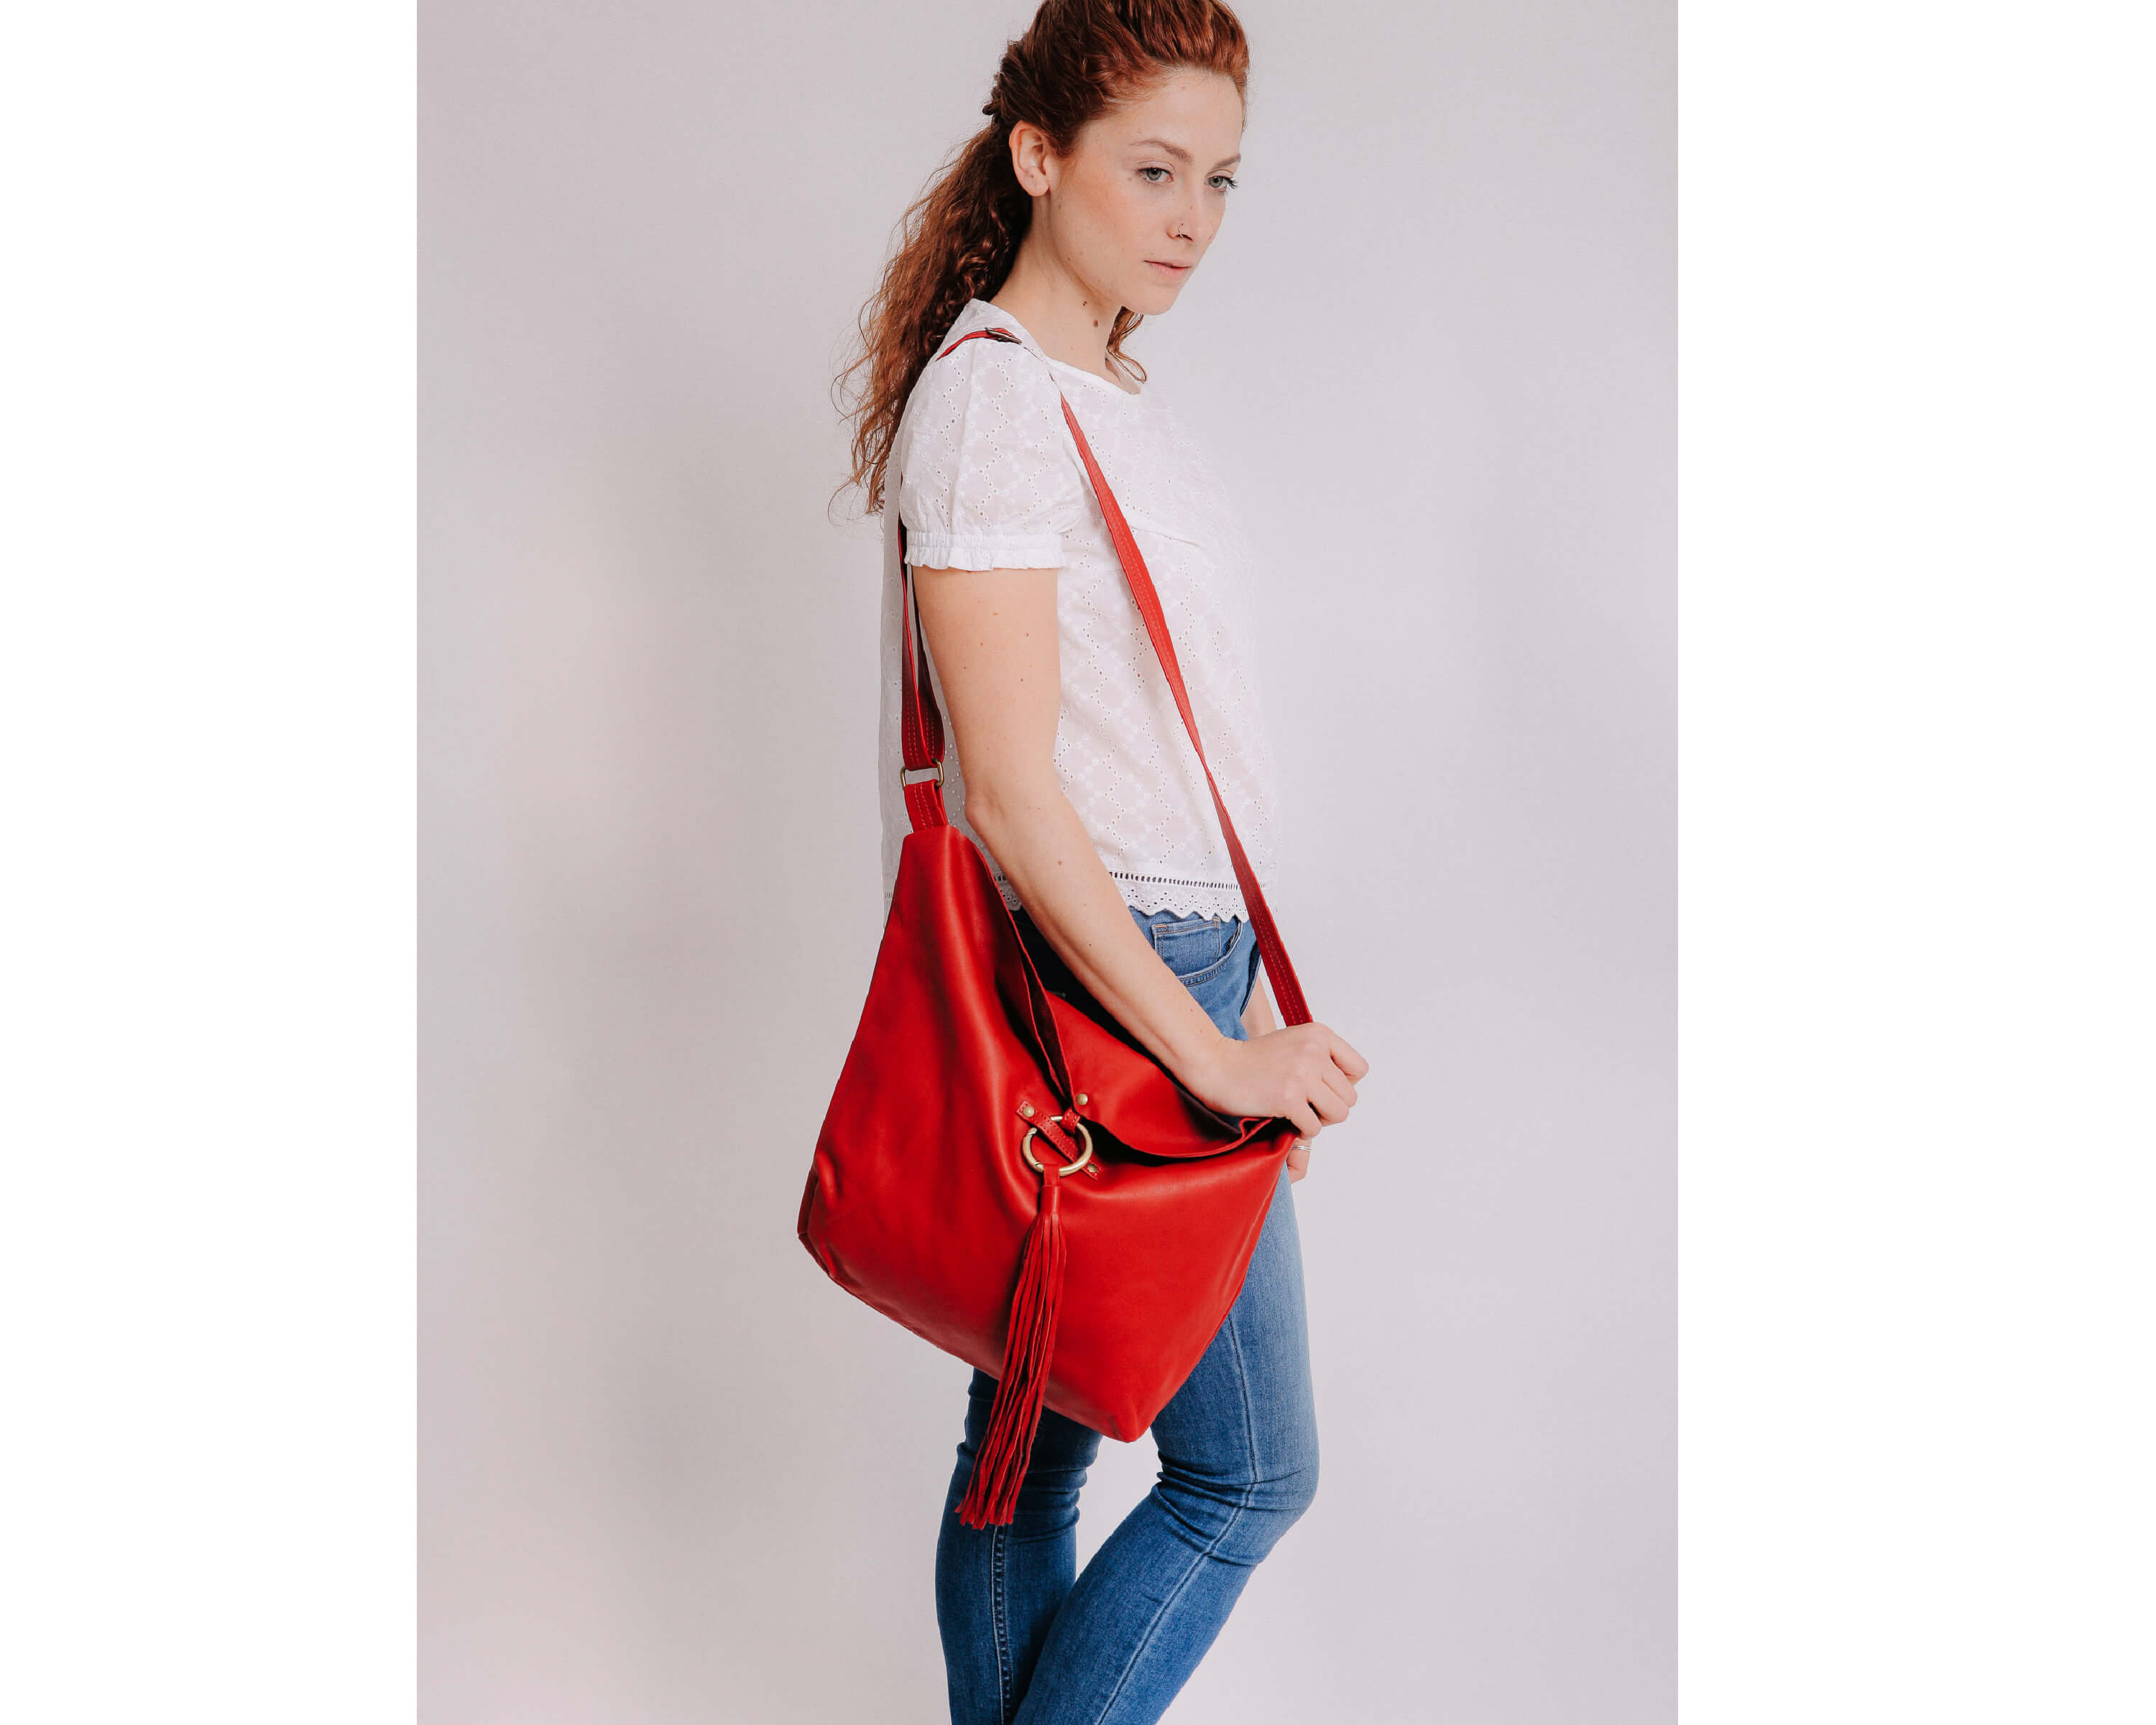 Small Red Leather Hobo Bag - Slouchy Shoulder Purse